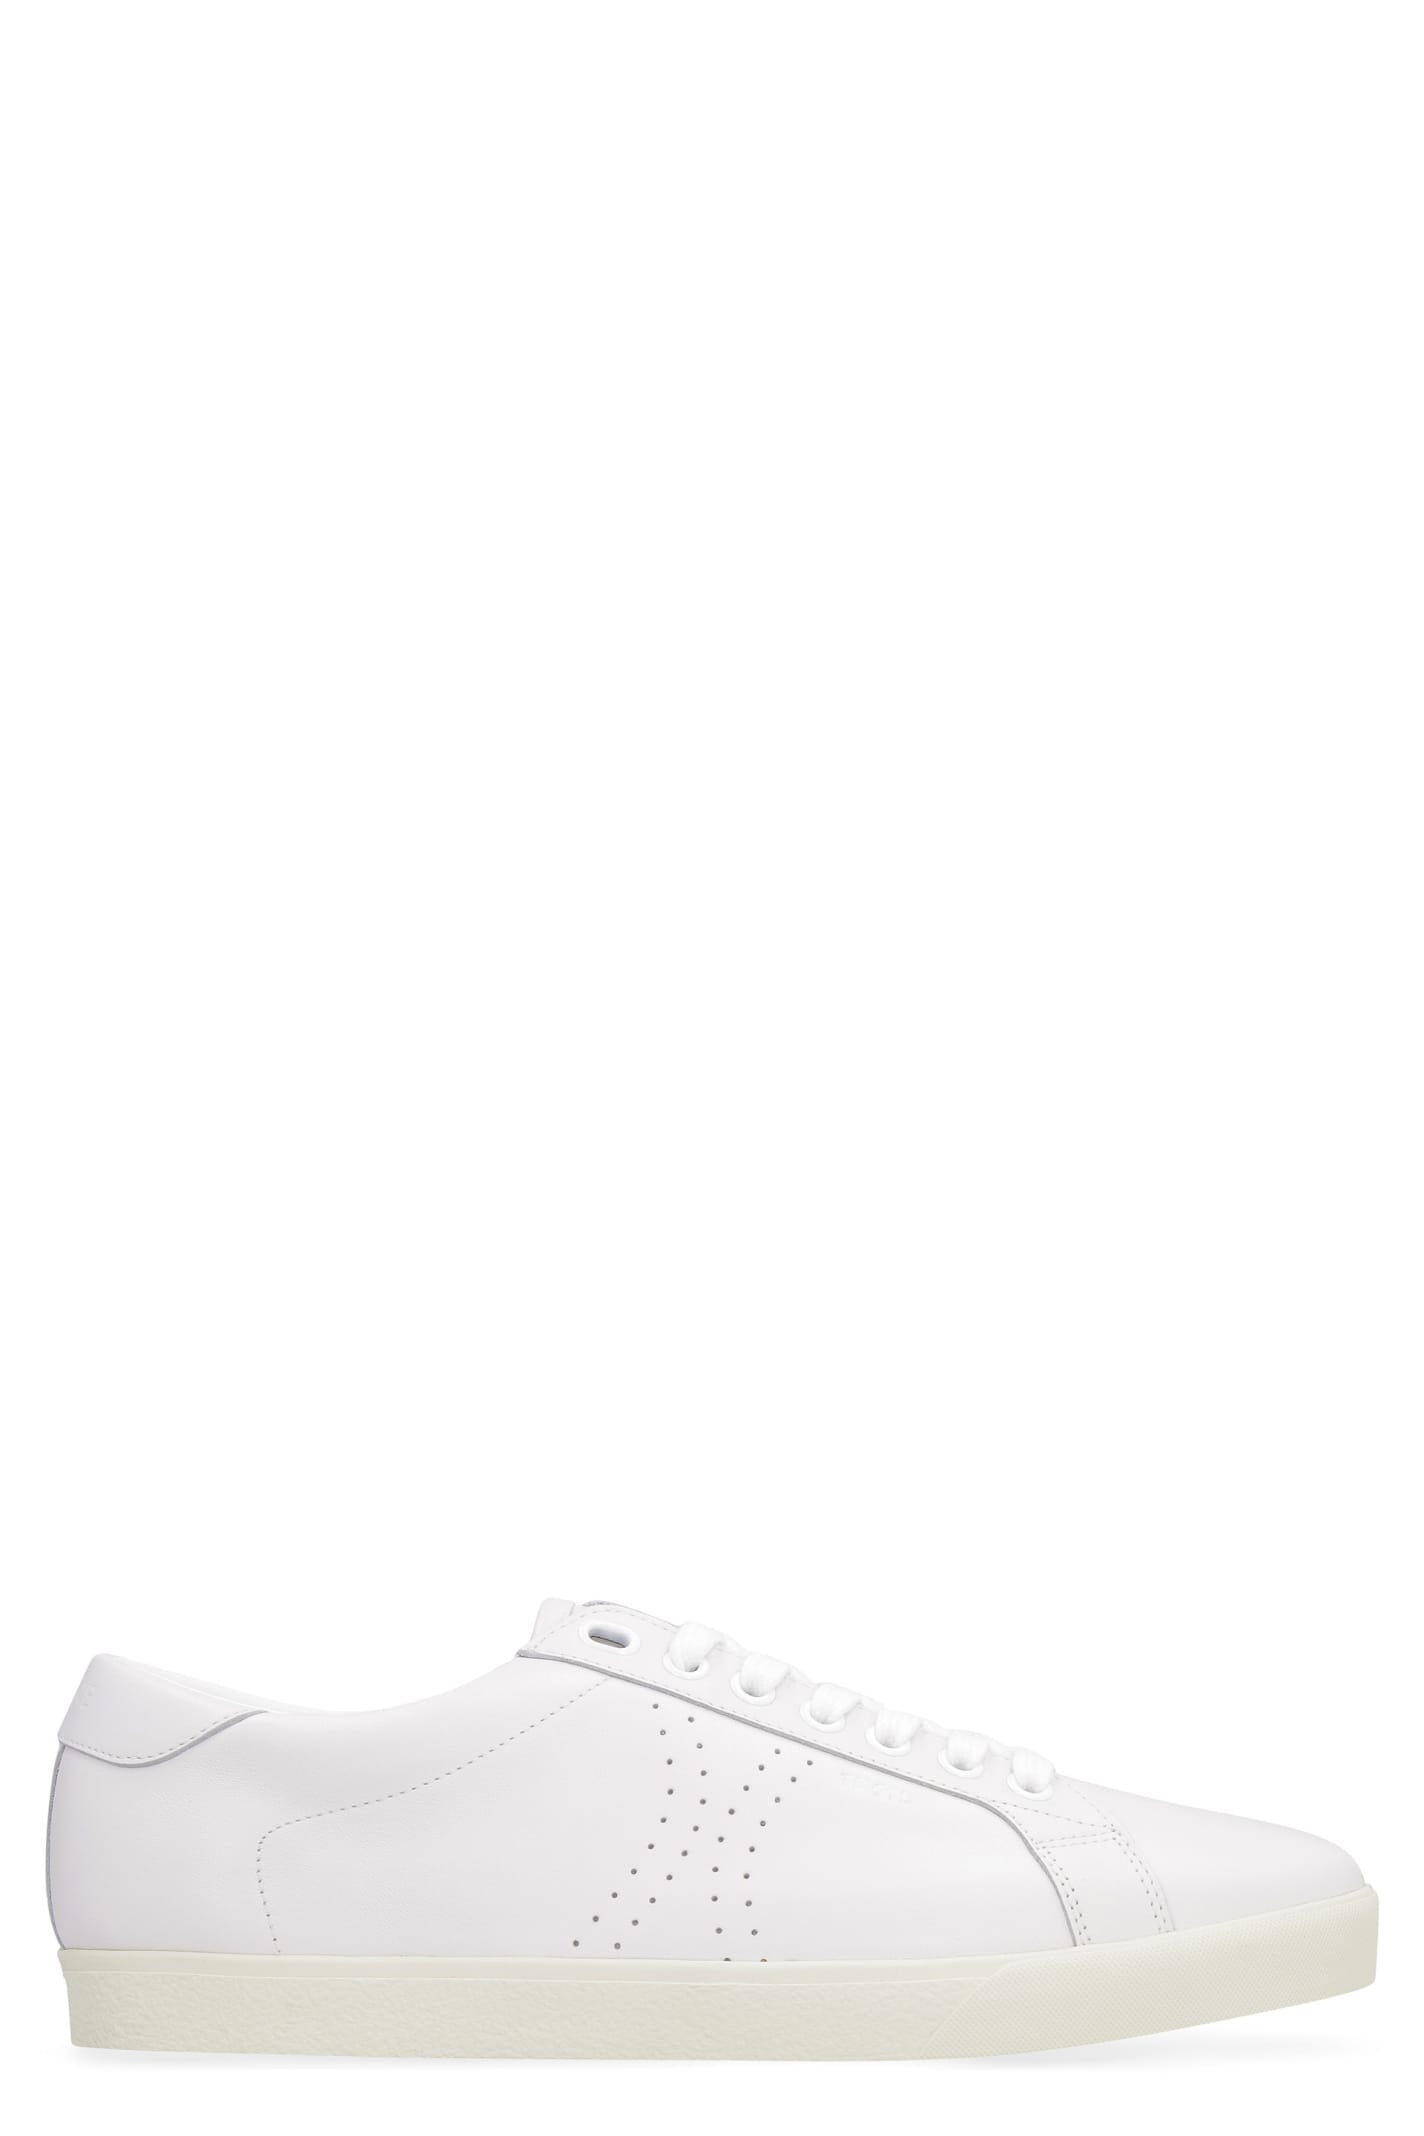 Buy Celine Triomphe Leather Low-top Sneakers online, shop Celine shoes with free shipping